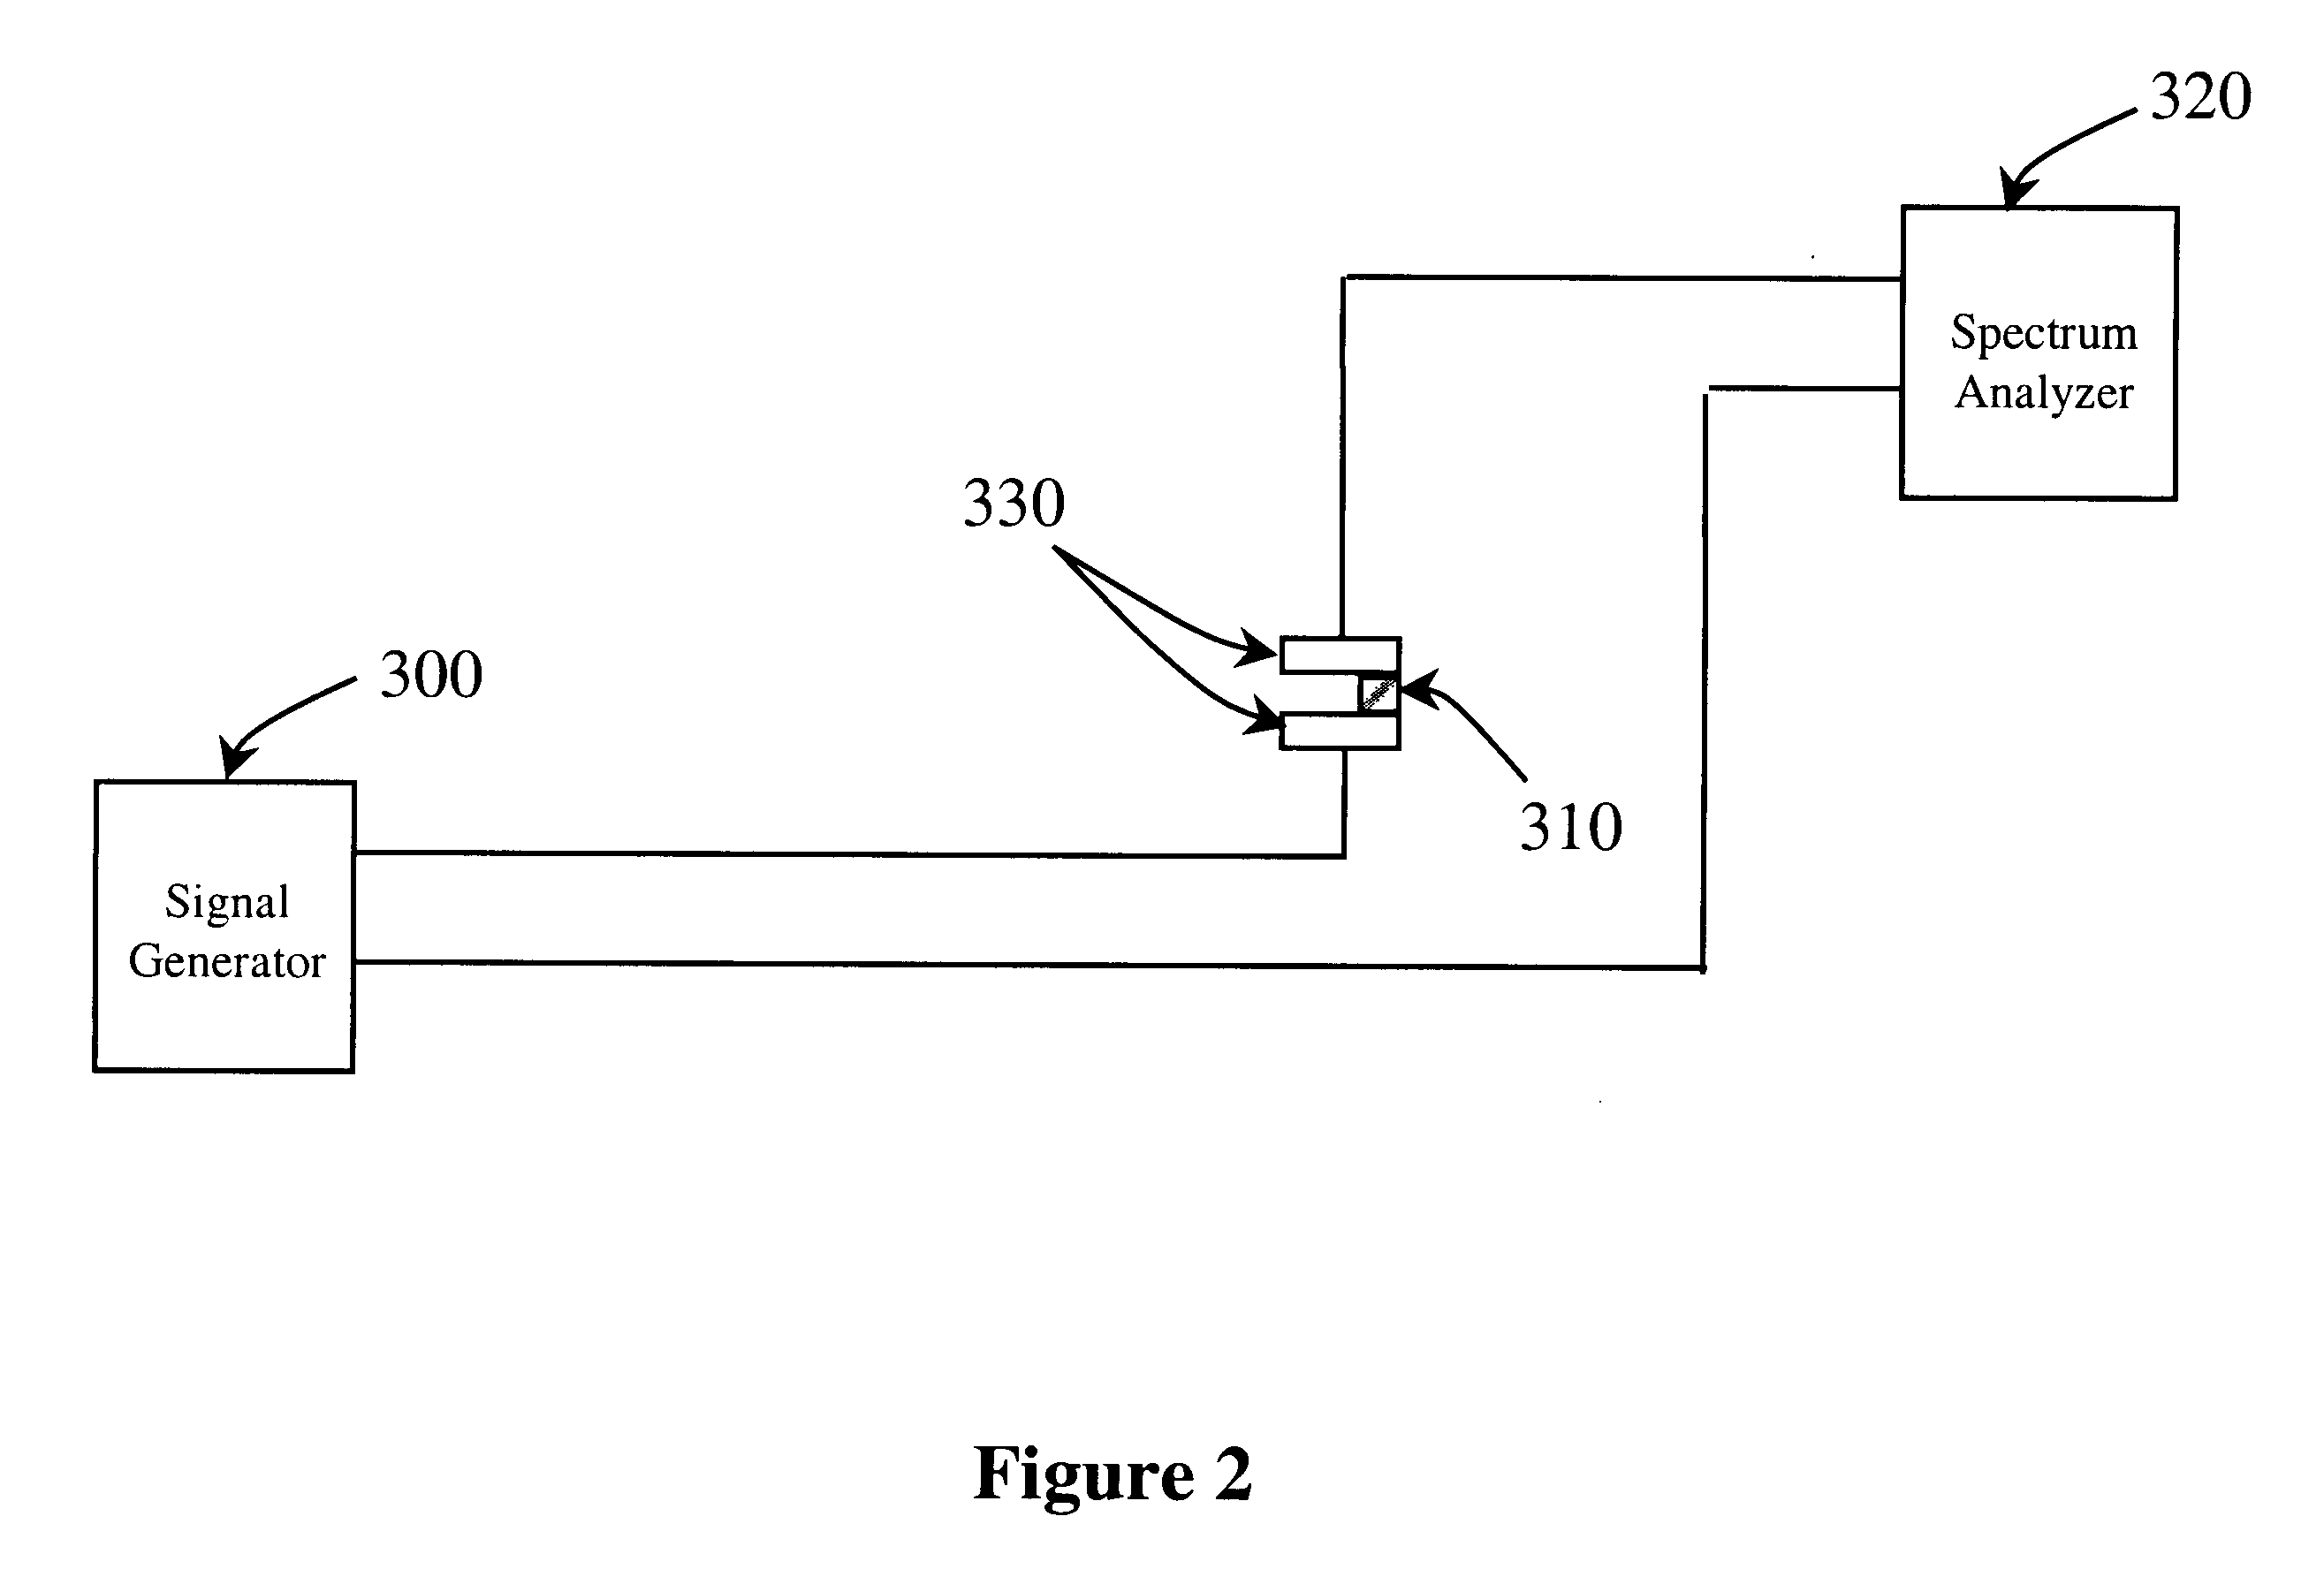 Apparatus and method to detect corrosion in metal junctions